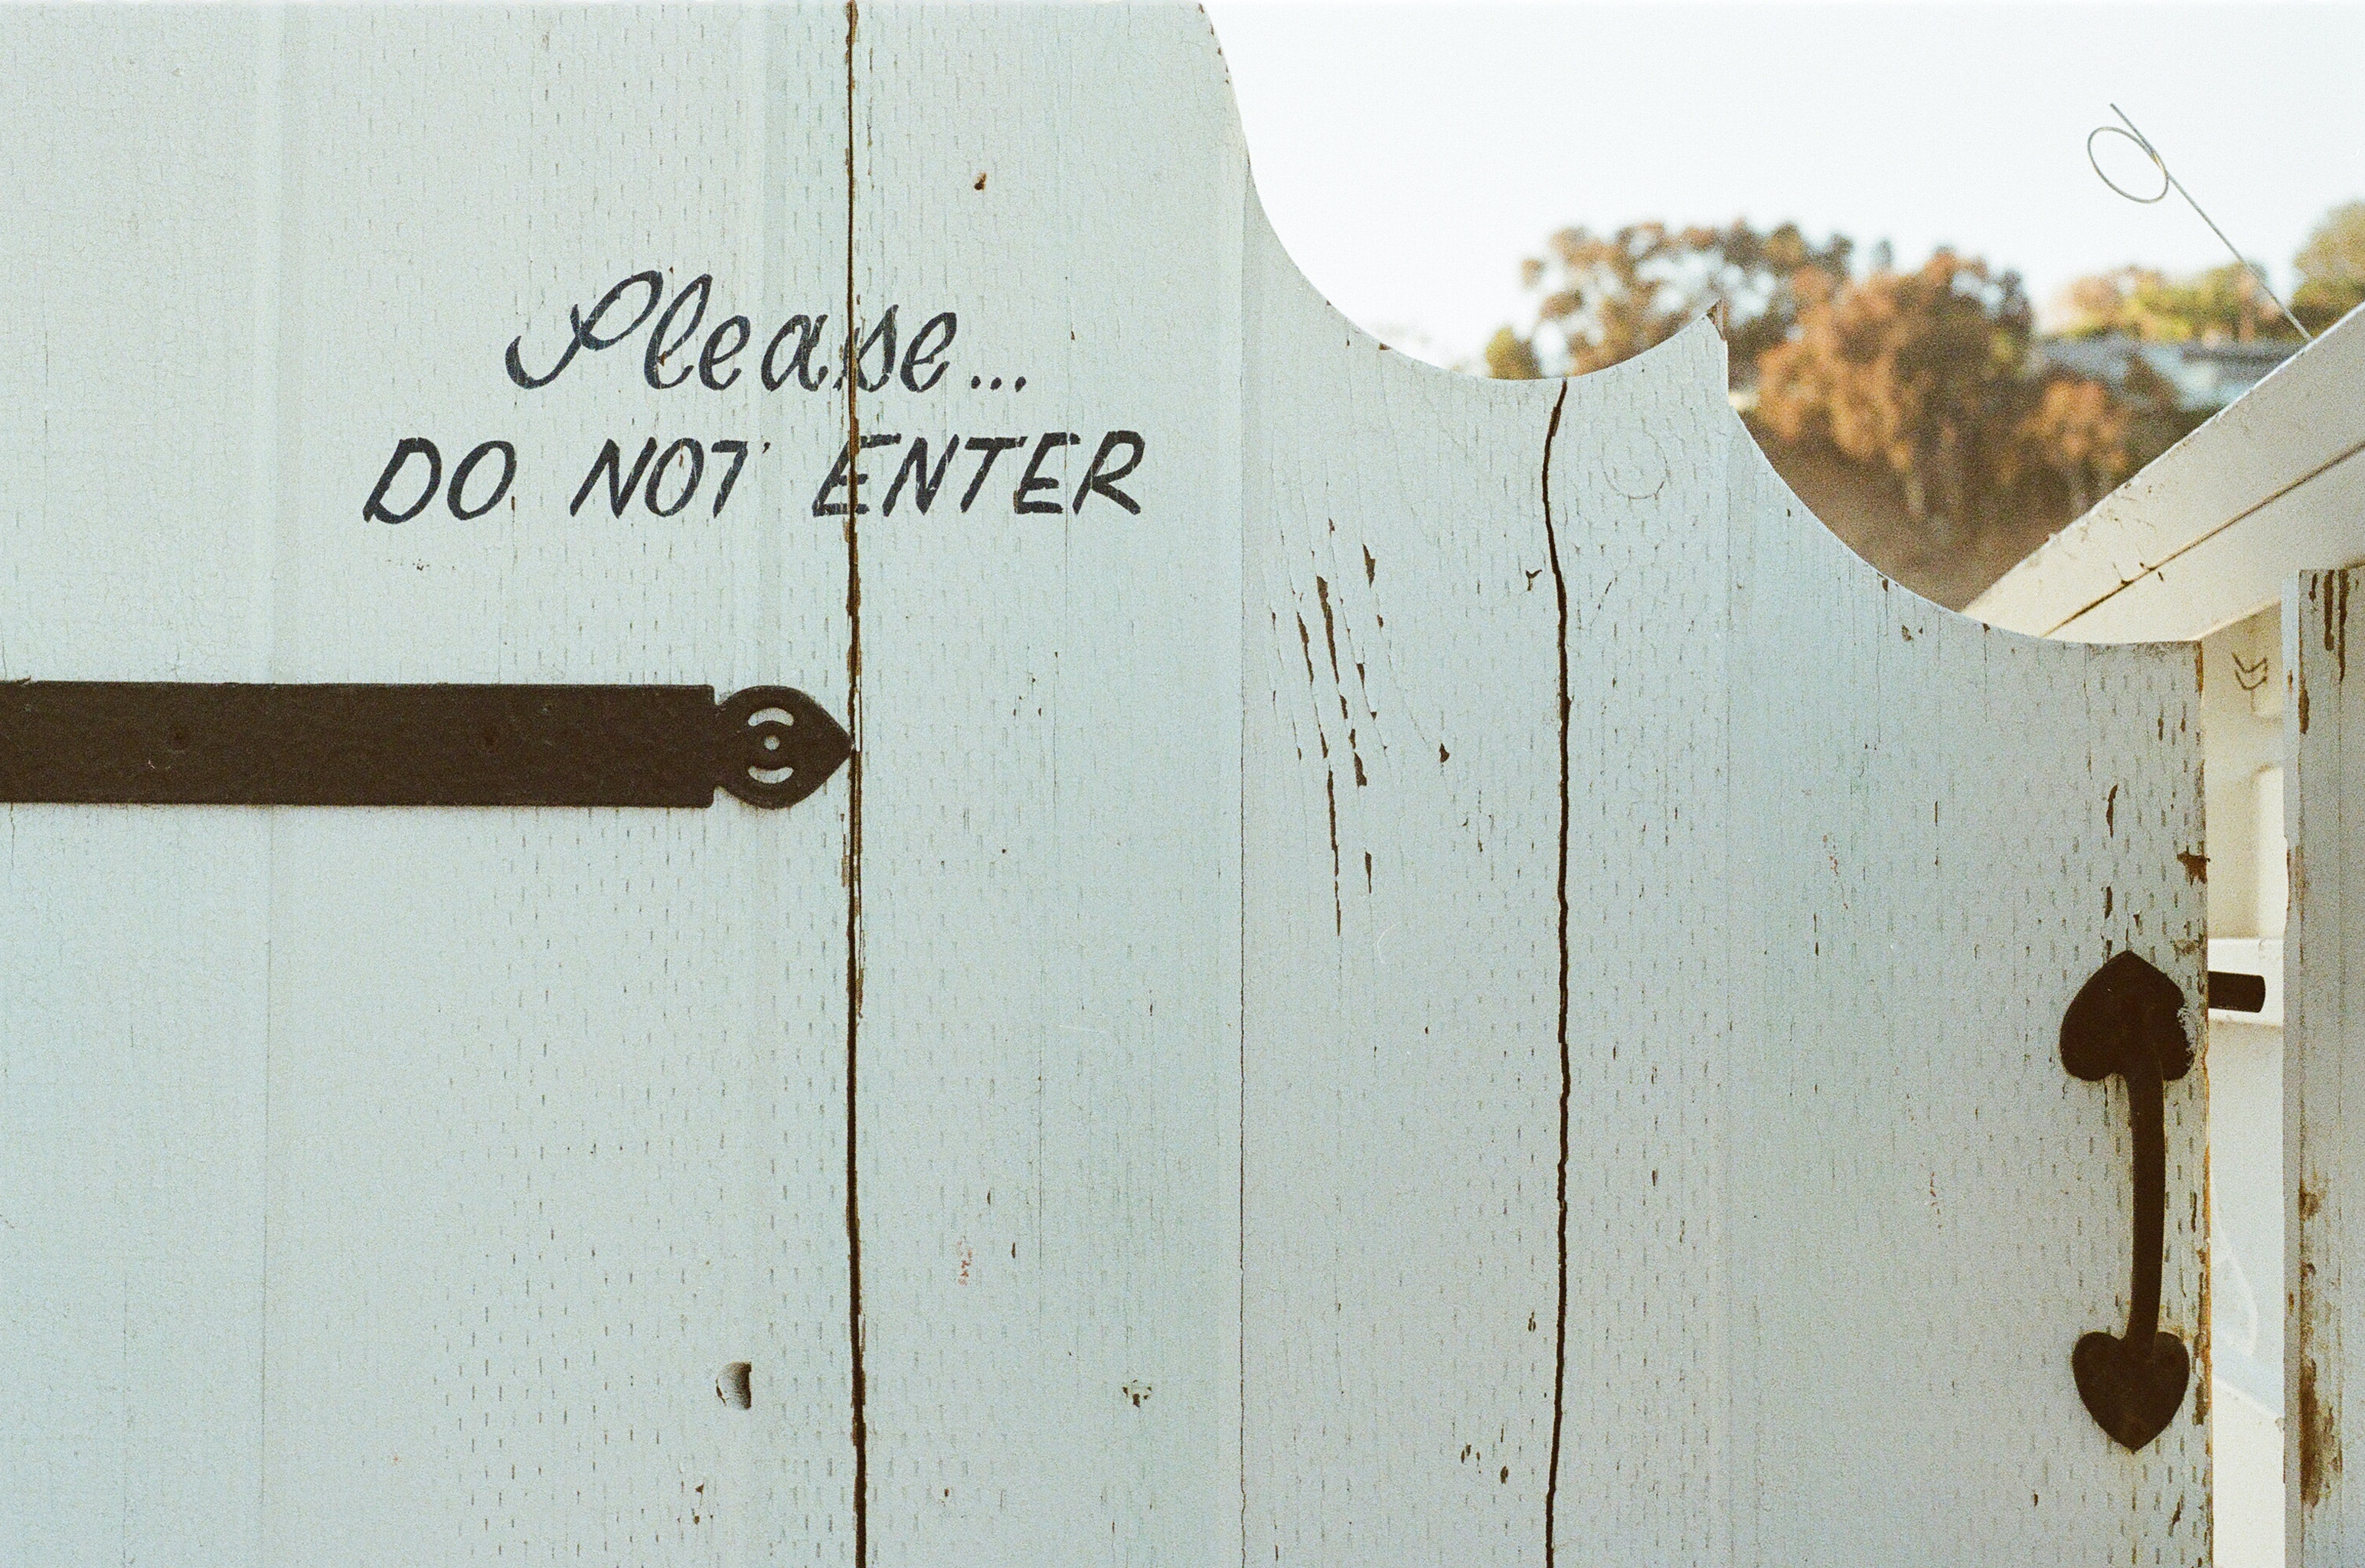 A gate with wording that reads: "Please...DO NOT ENTER" | Source: Pexels